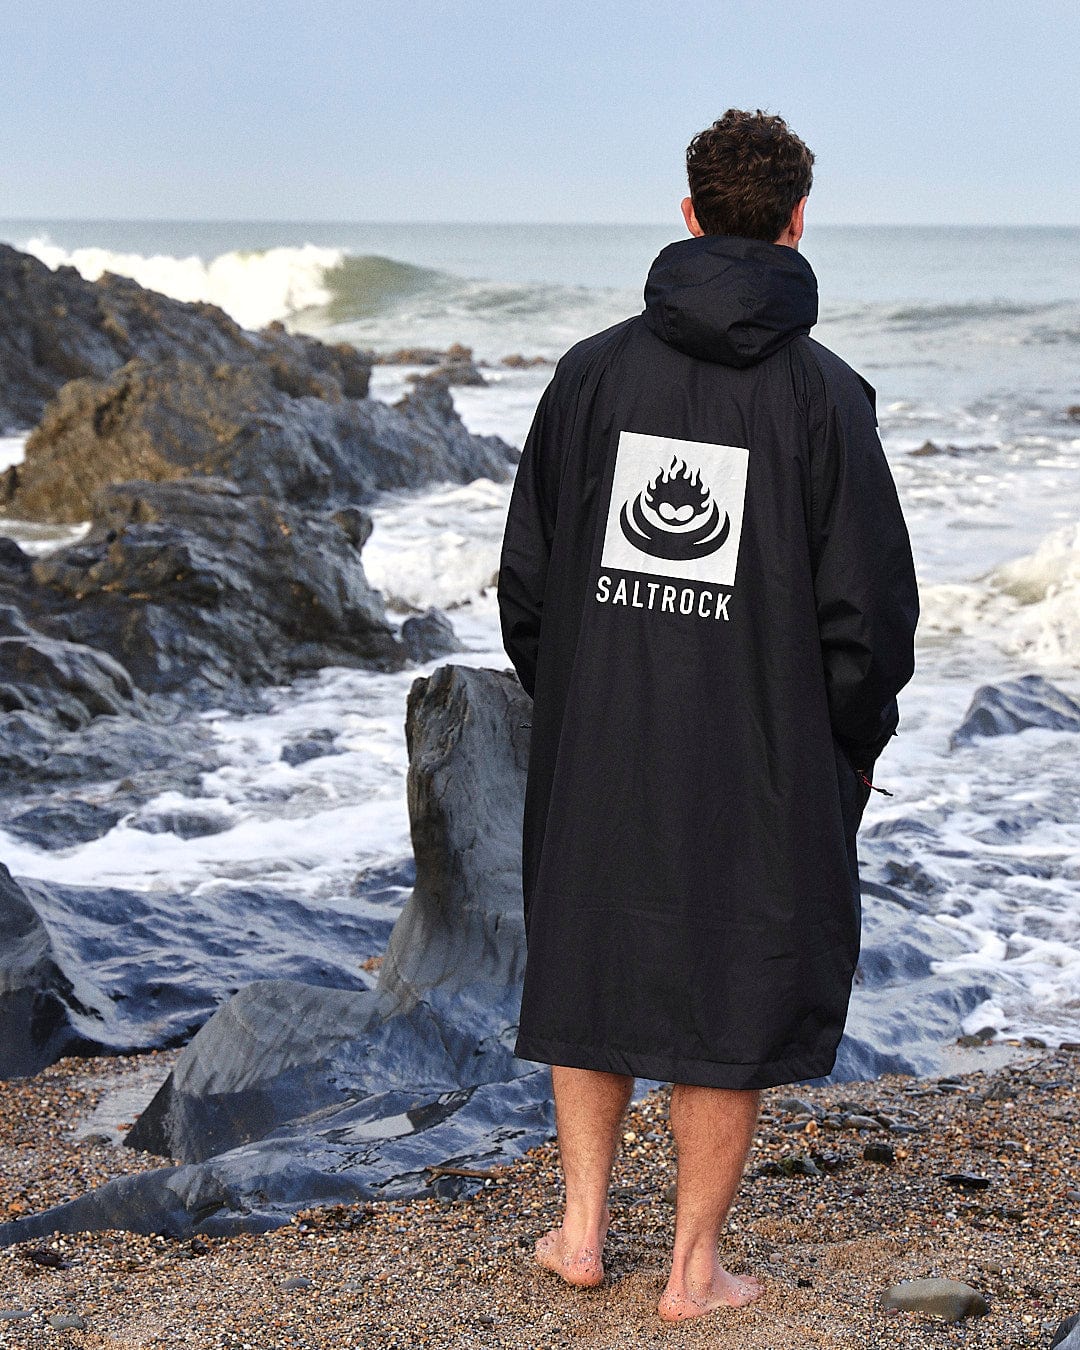 A man stands barefoot on a rocky beach facing the ocean, wearing a black hooded jacket with a "Saltrock" logo on the back. The jacket is actually a Recycled Four Seasons Changing Robe designed for beach.